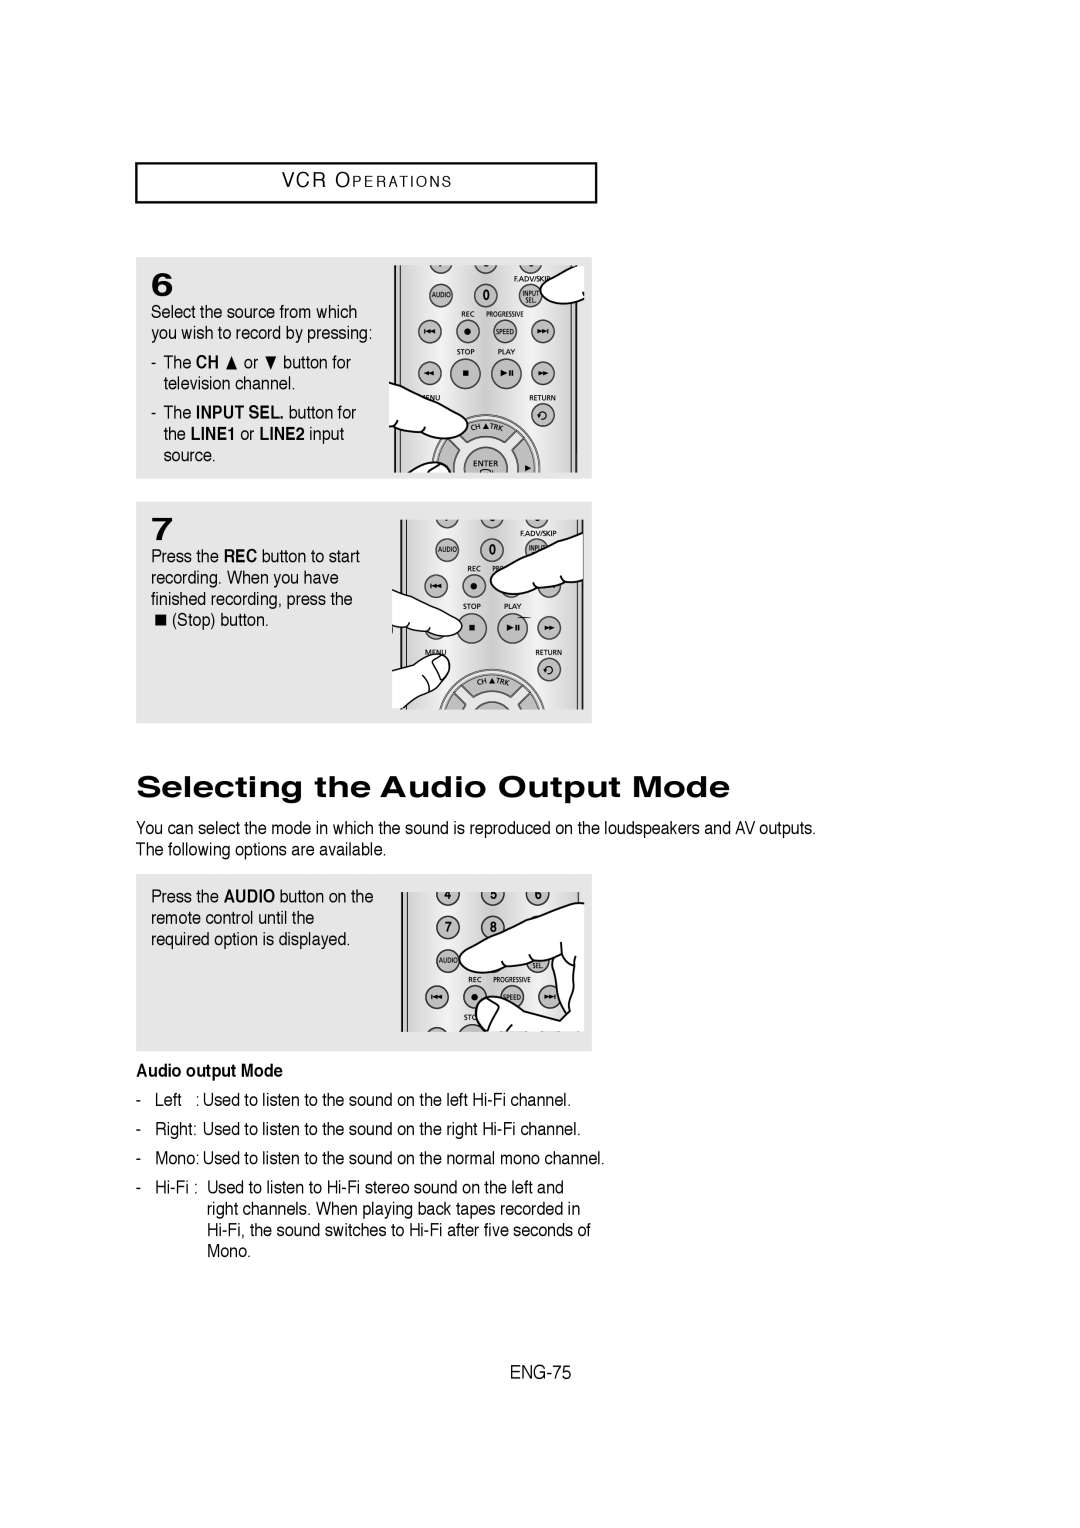 Samsung 20070205090323359 Selecting the Audio Output Mode, ENG-75, the LINE1 or LINE2 input source, Audio output Mode 